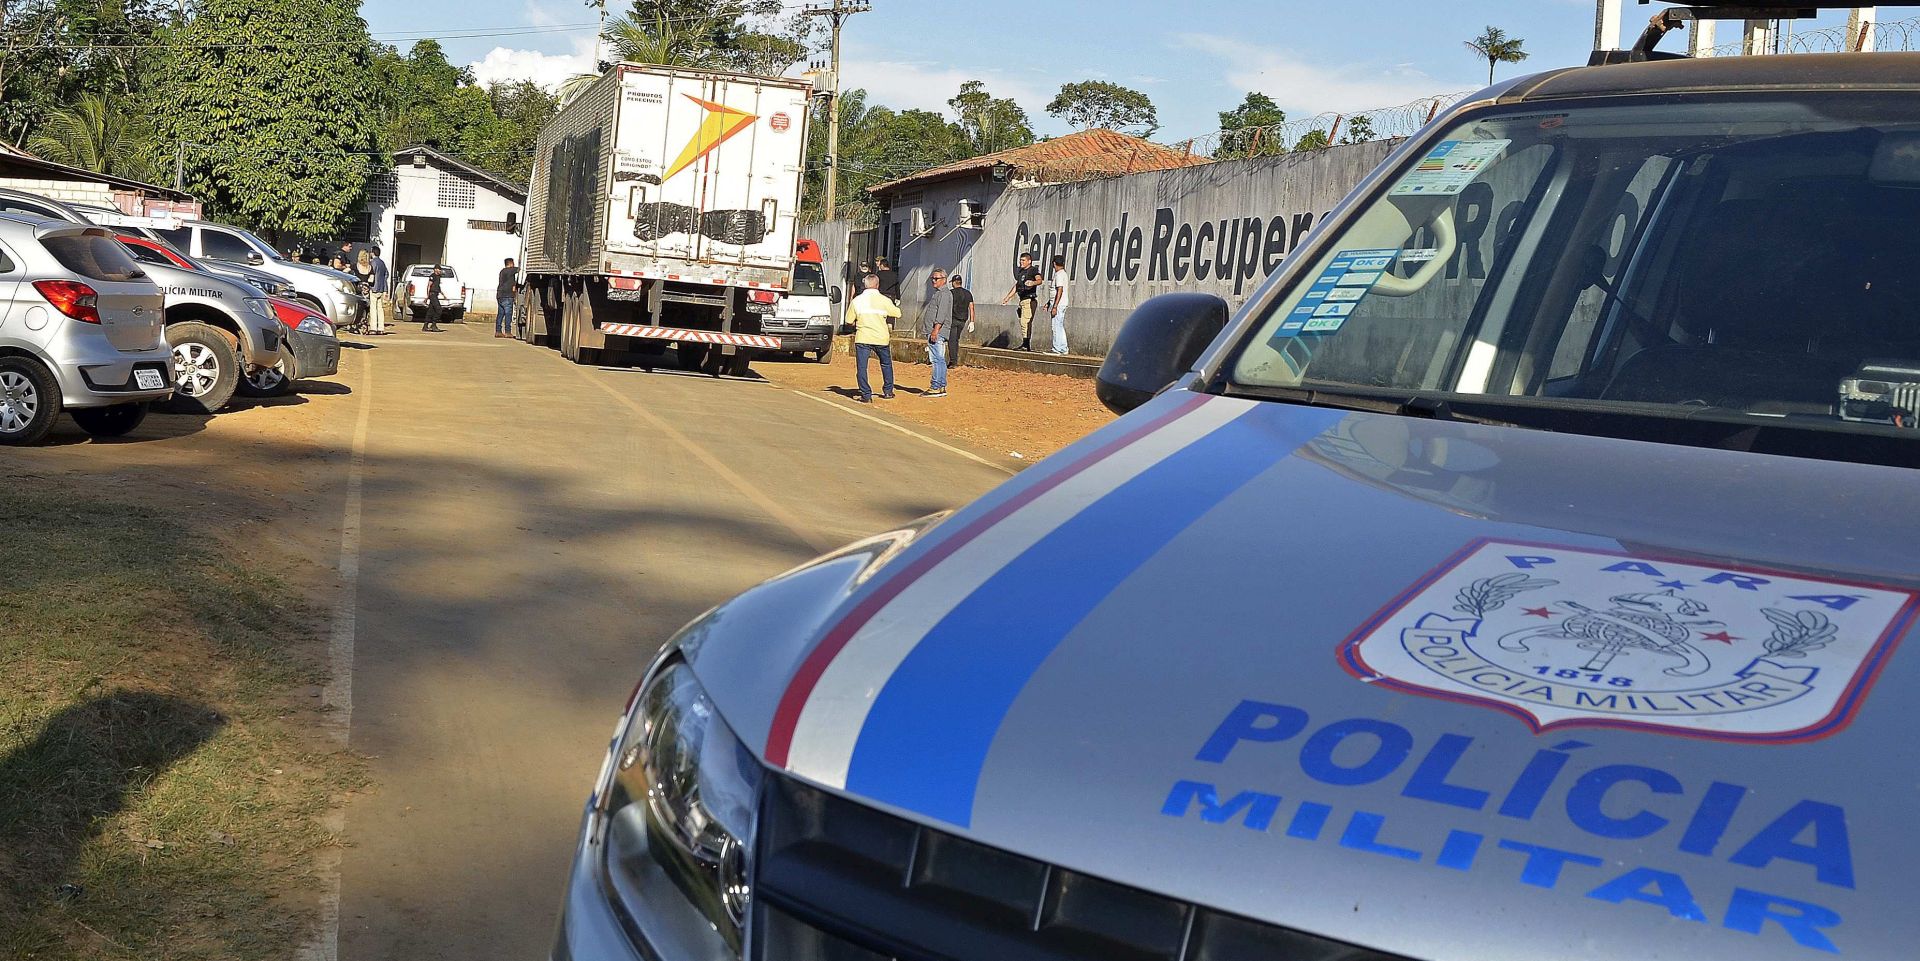 epa07748137 A refrigerated truck arrives at the Regional Recovery Center in Altamira, Para state, Brazil, 29 July 2019. A Riot that broke out on 29 July, between rival gangs at the Regional Recovery Center, has claimed the lives of more than 50 inmates.  EPA/KAIO MARCELLUS